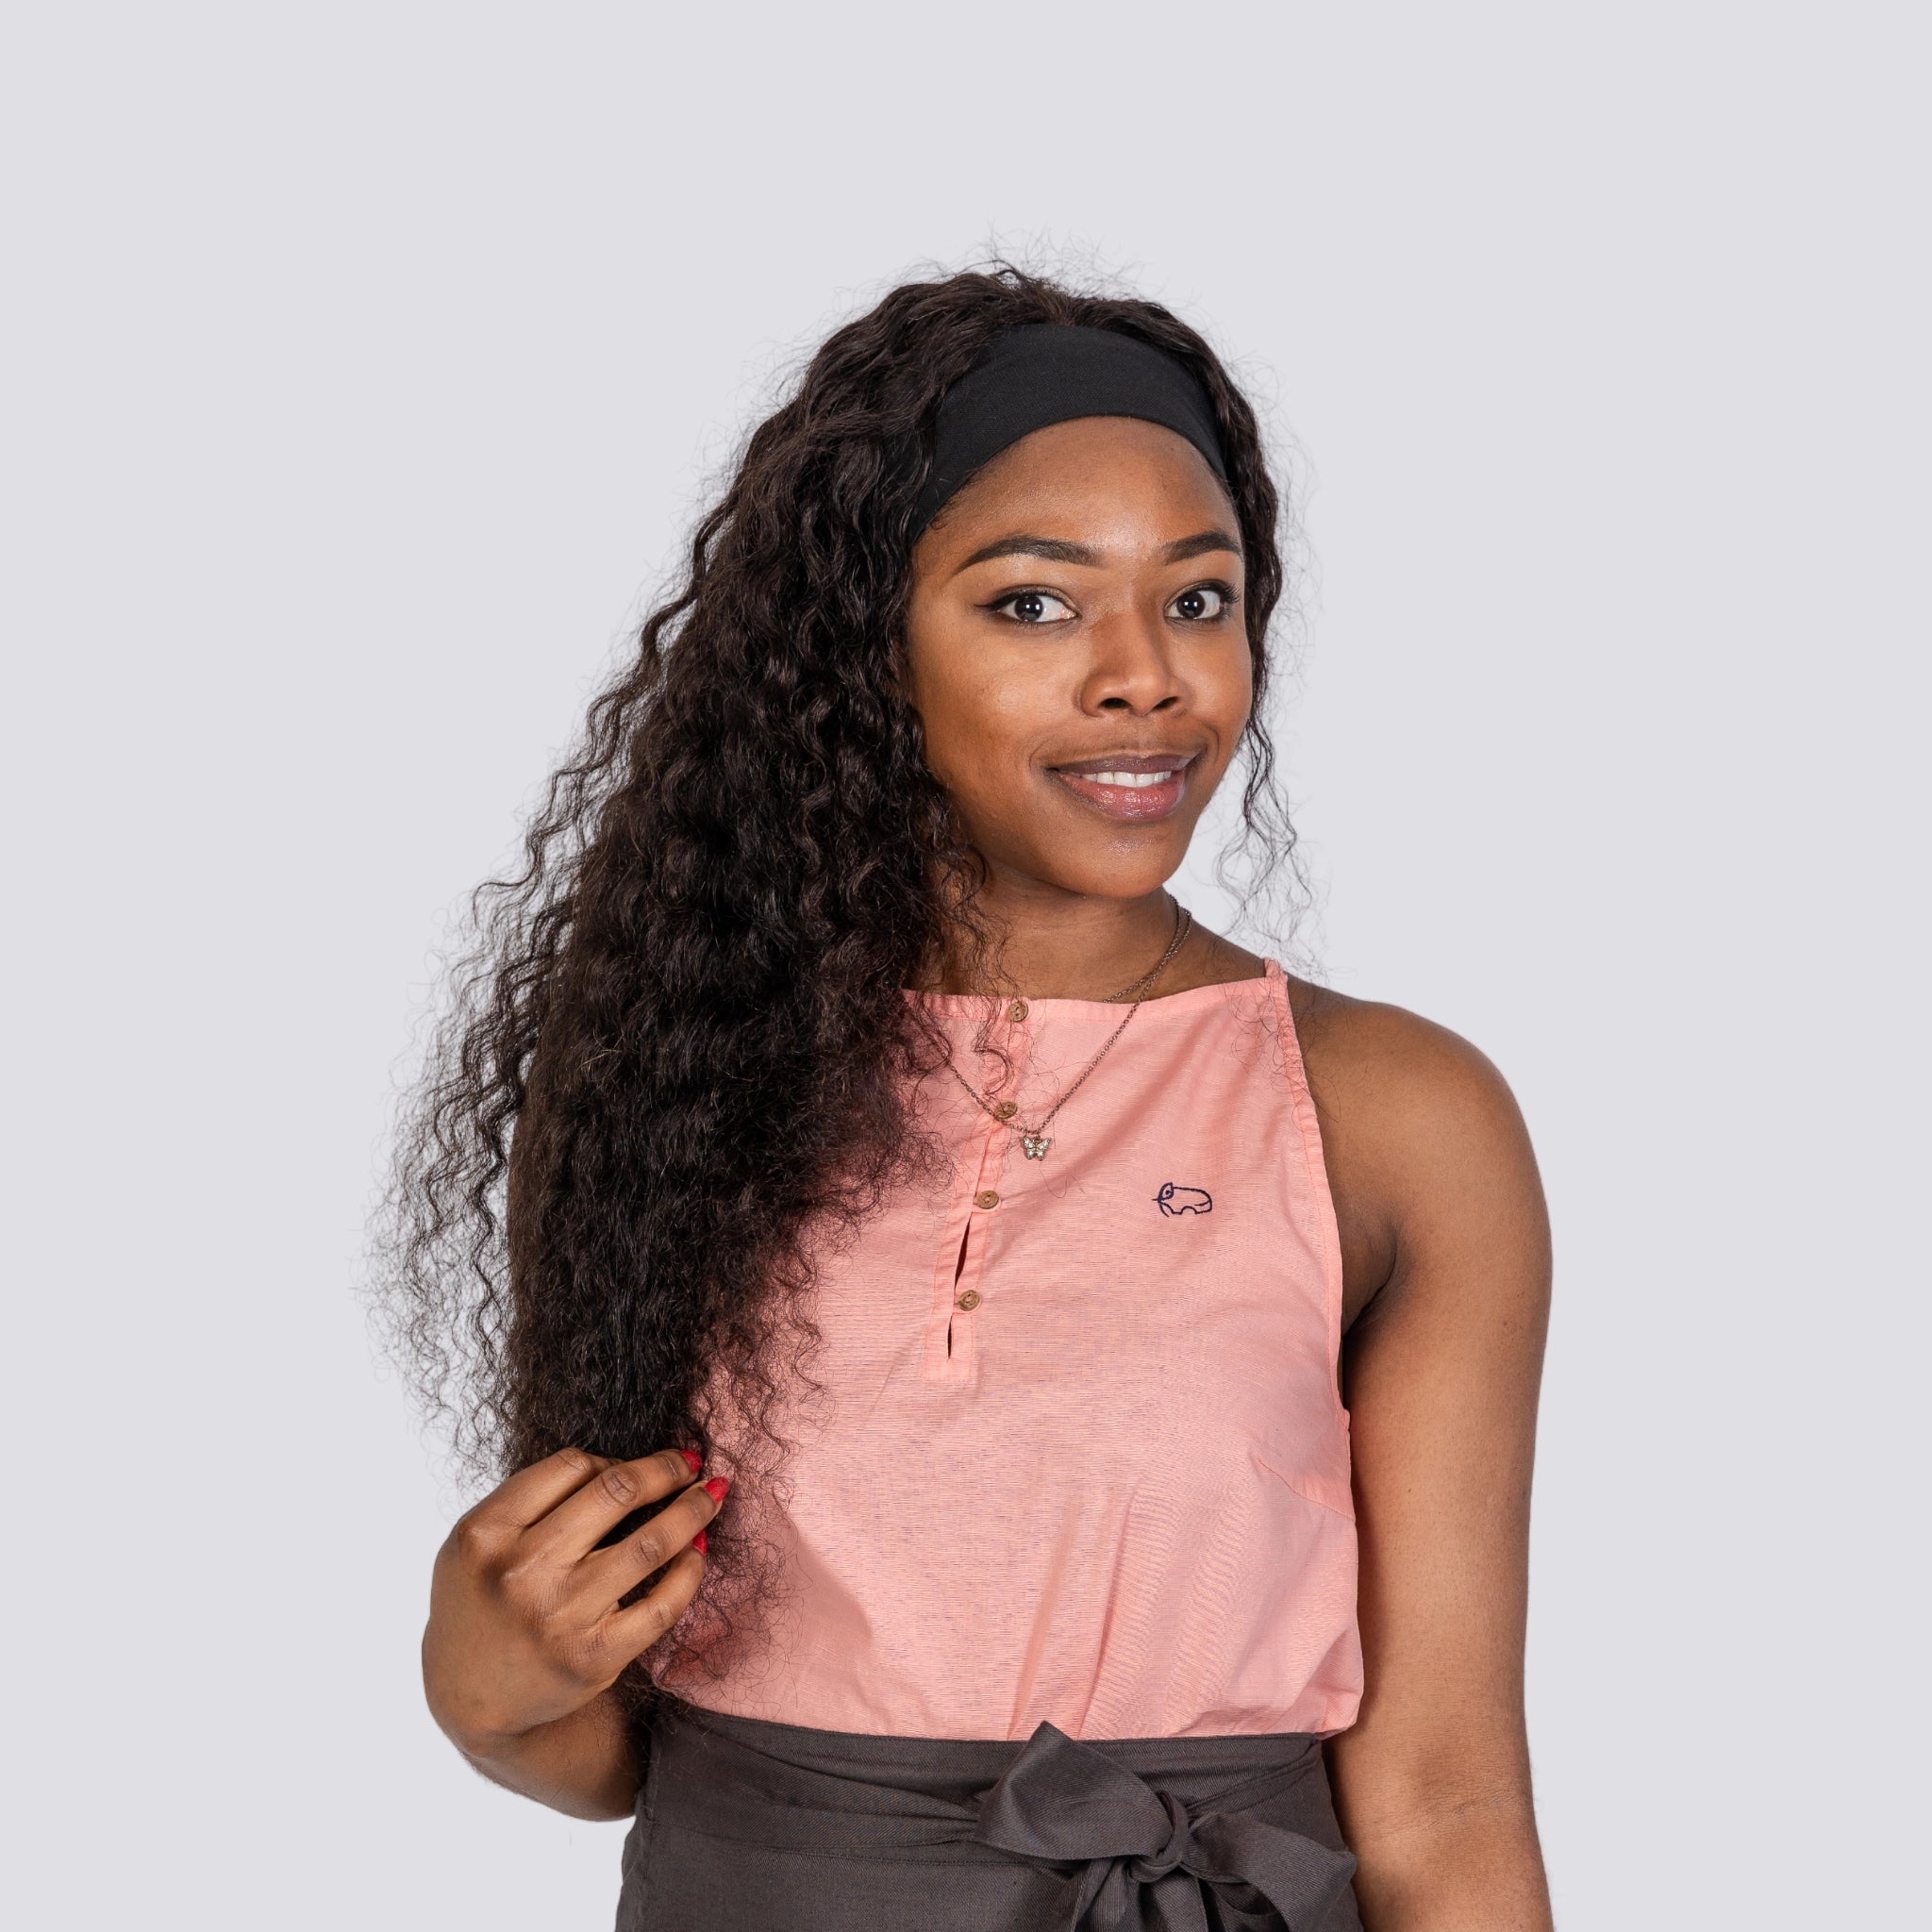 A woman with long curly hair, wearing a Karee Wild Rose Harmony Halter Cami Top made of sustainable materials, and a headband, standing against a grey background, looking slightly to her left.